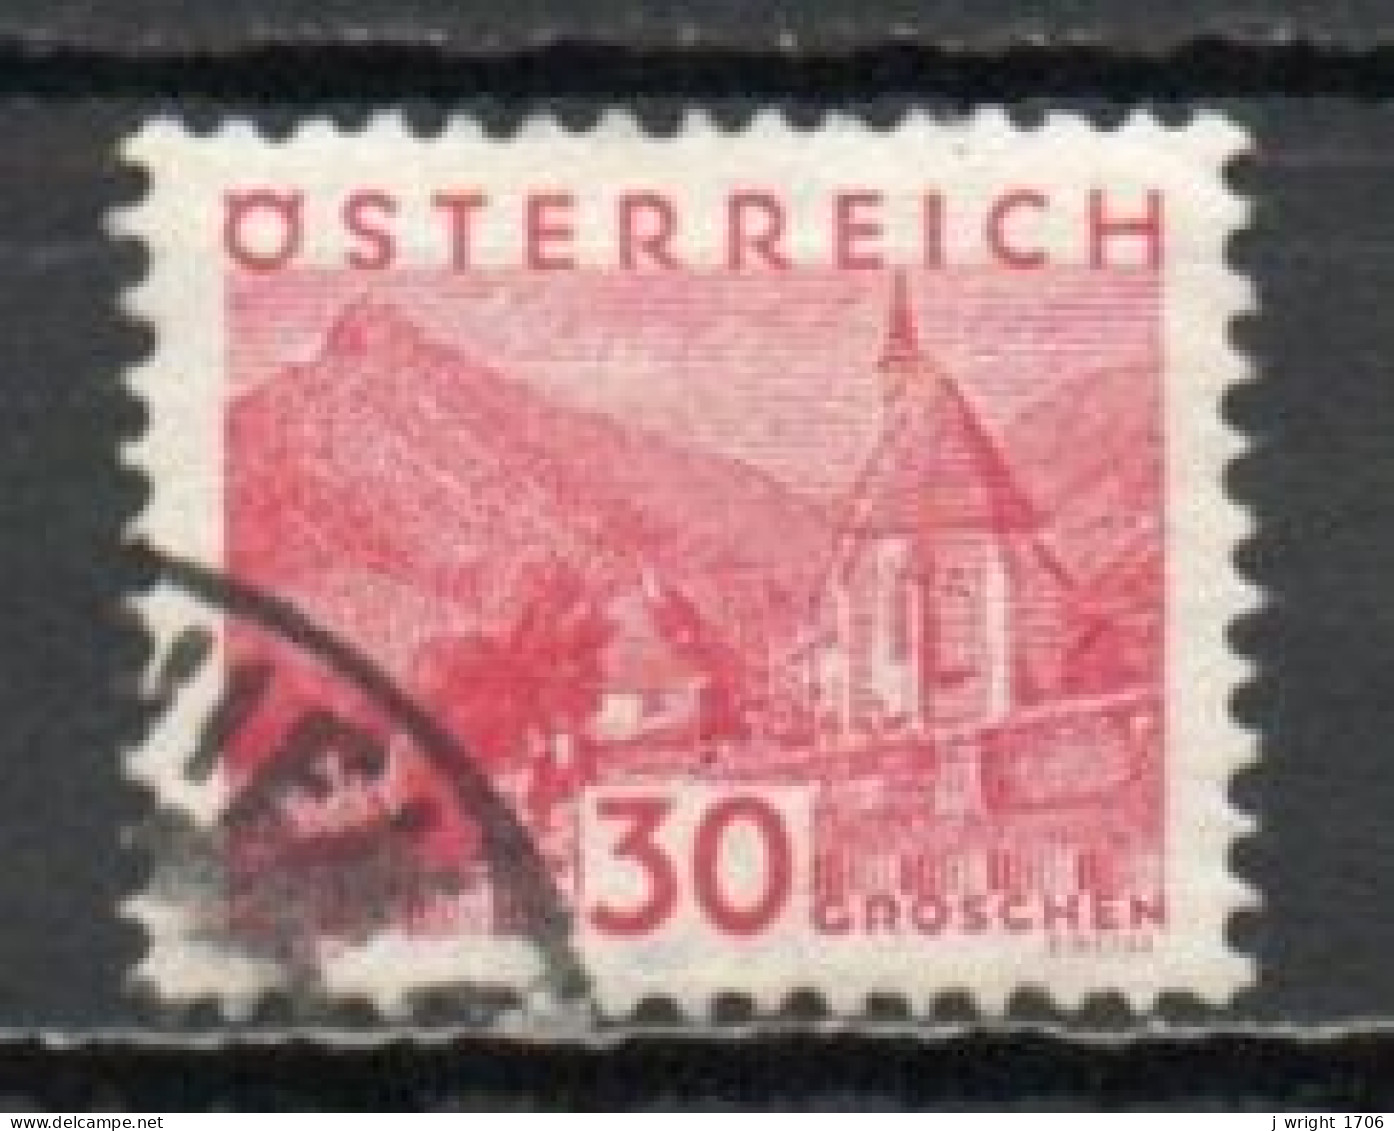 Austria, 1932, Landscapes Small Format/Seewiesen, 30g/Red, USED - Used Stamps